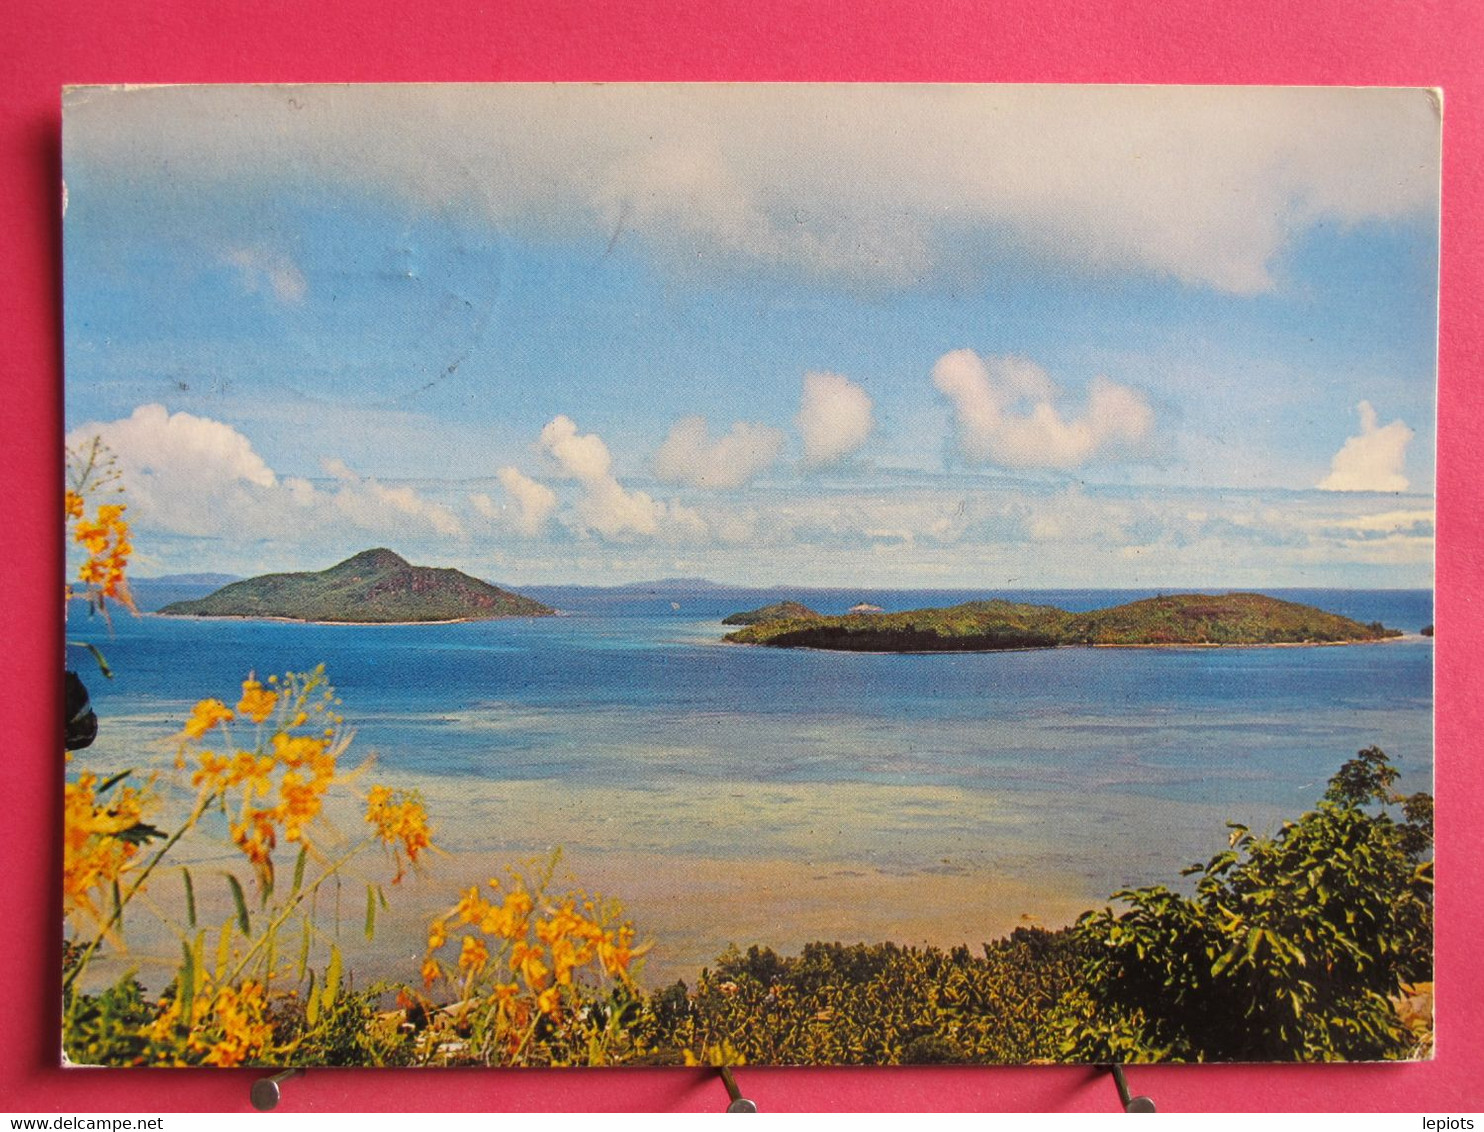 Visuel Très Peu Courant - Seychelles - A View Of Mahé Showing St. Anne And Cerf Island - R/verso - Seychelles